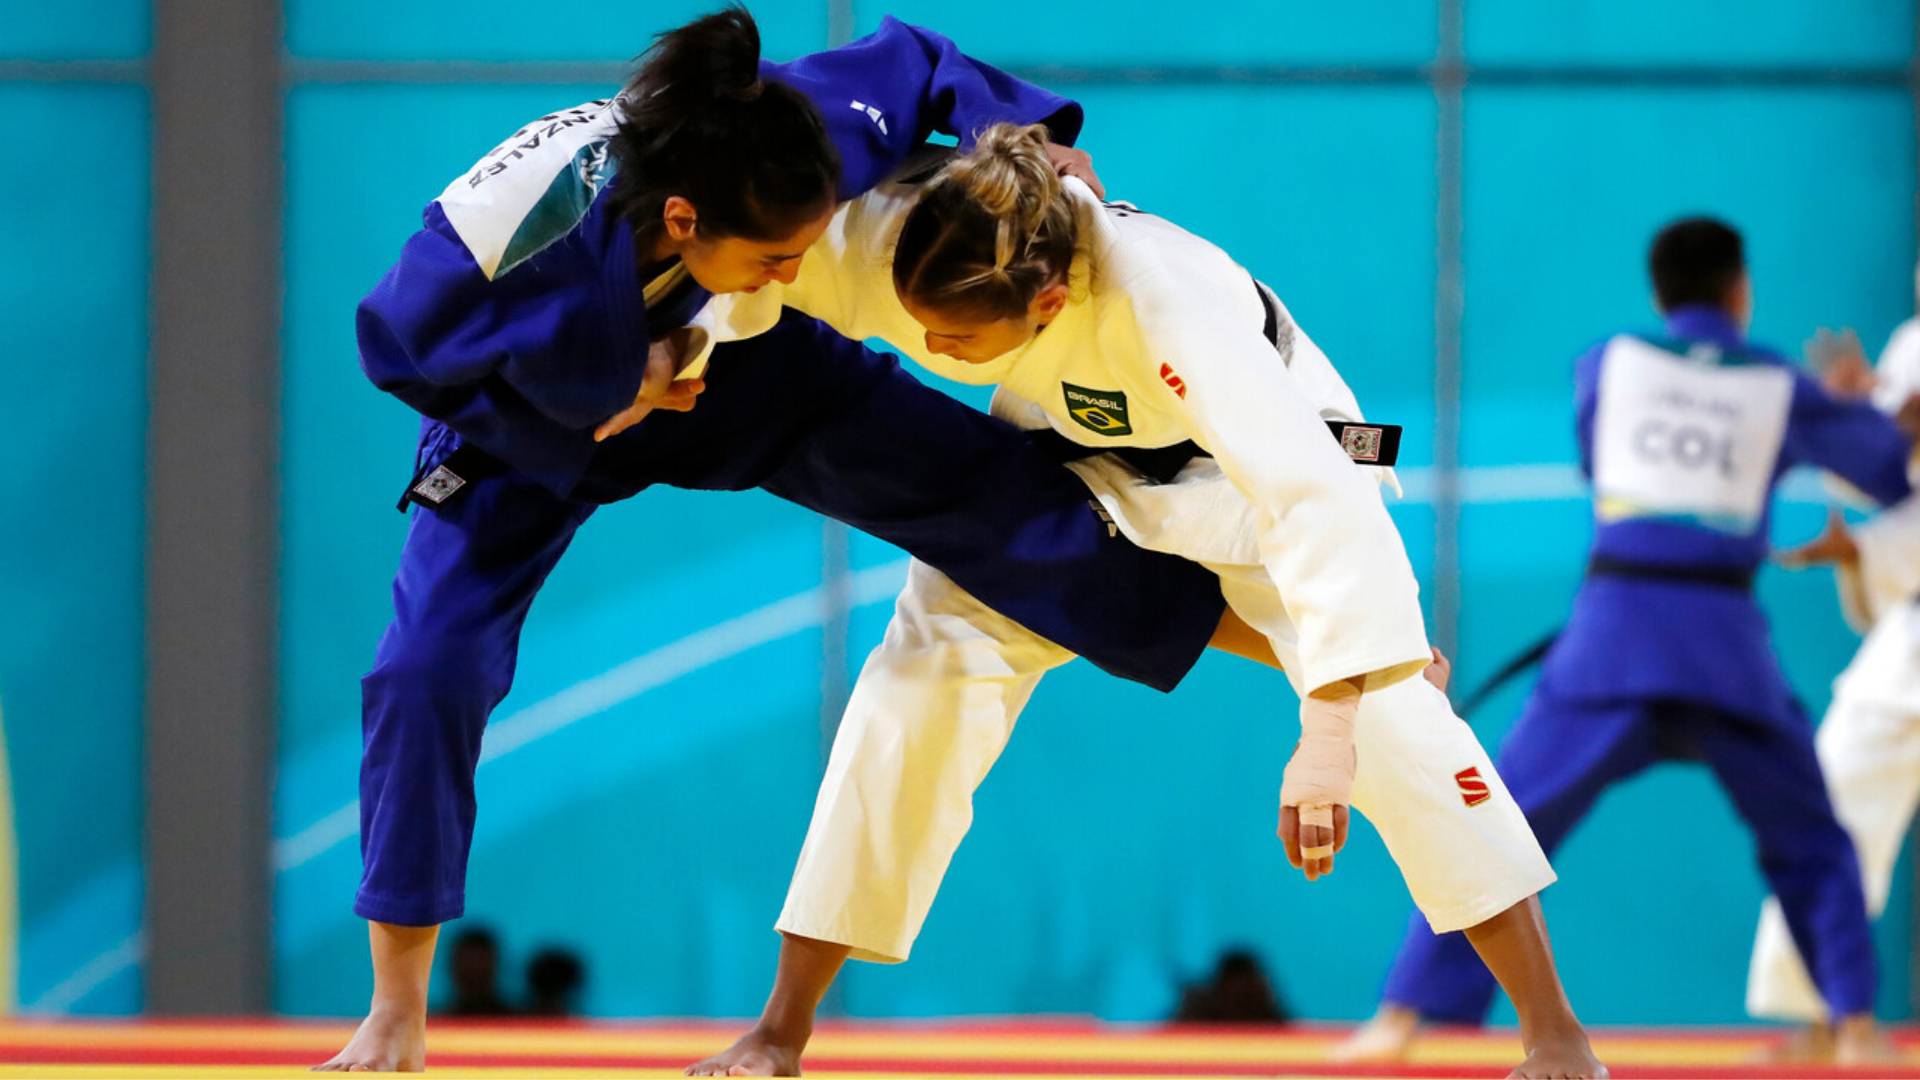 Three Chileans compete for bronze medals on the first day of judo